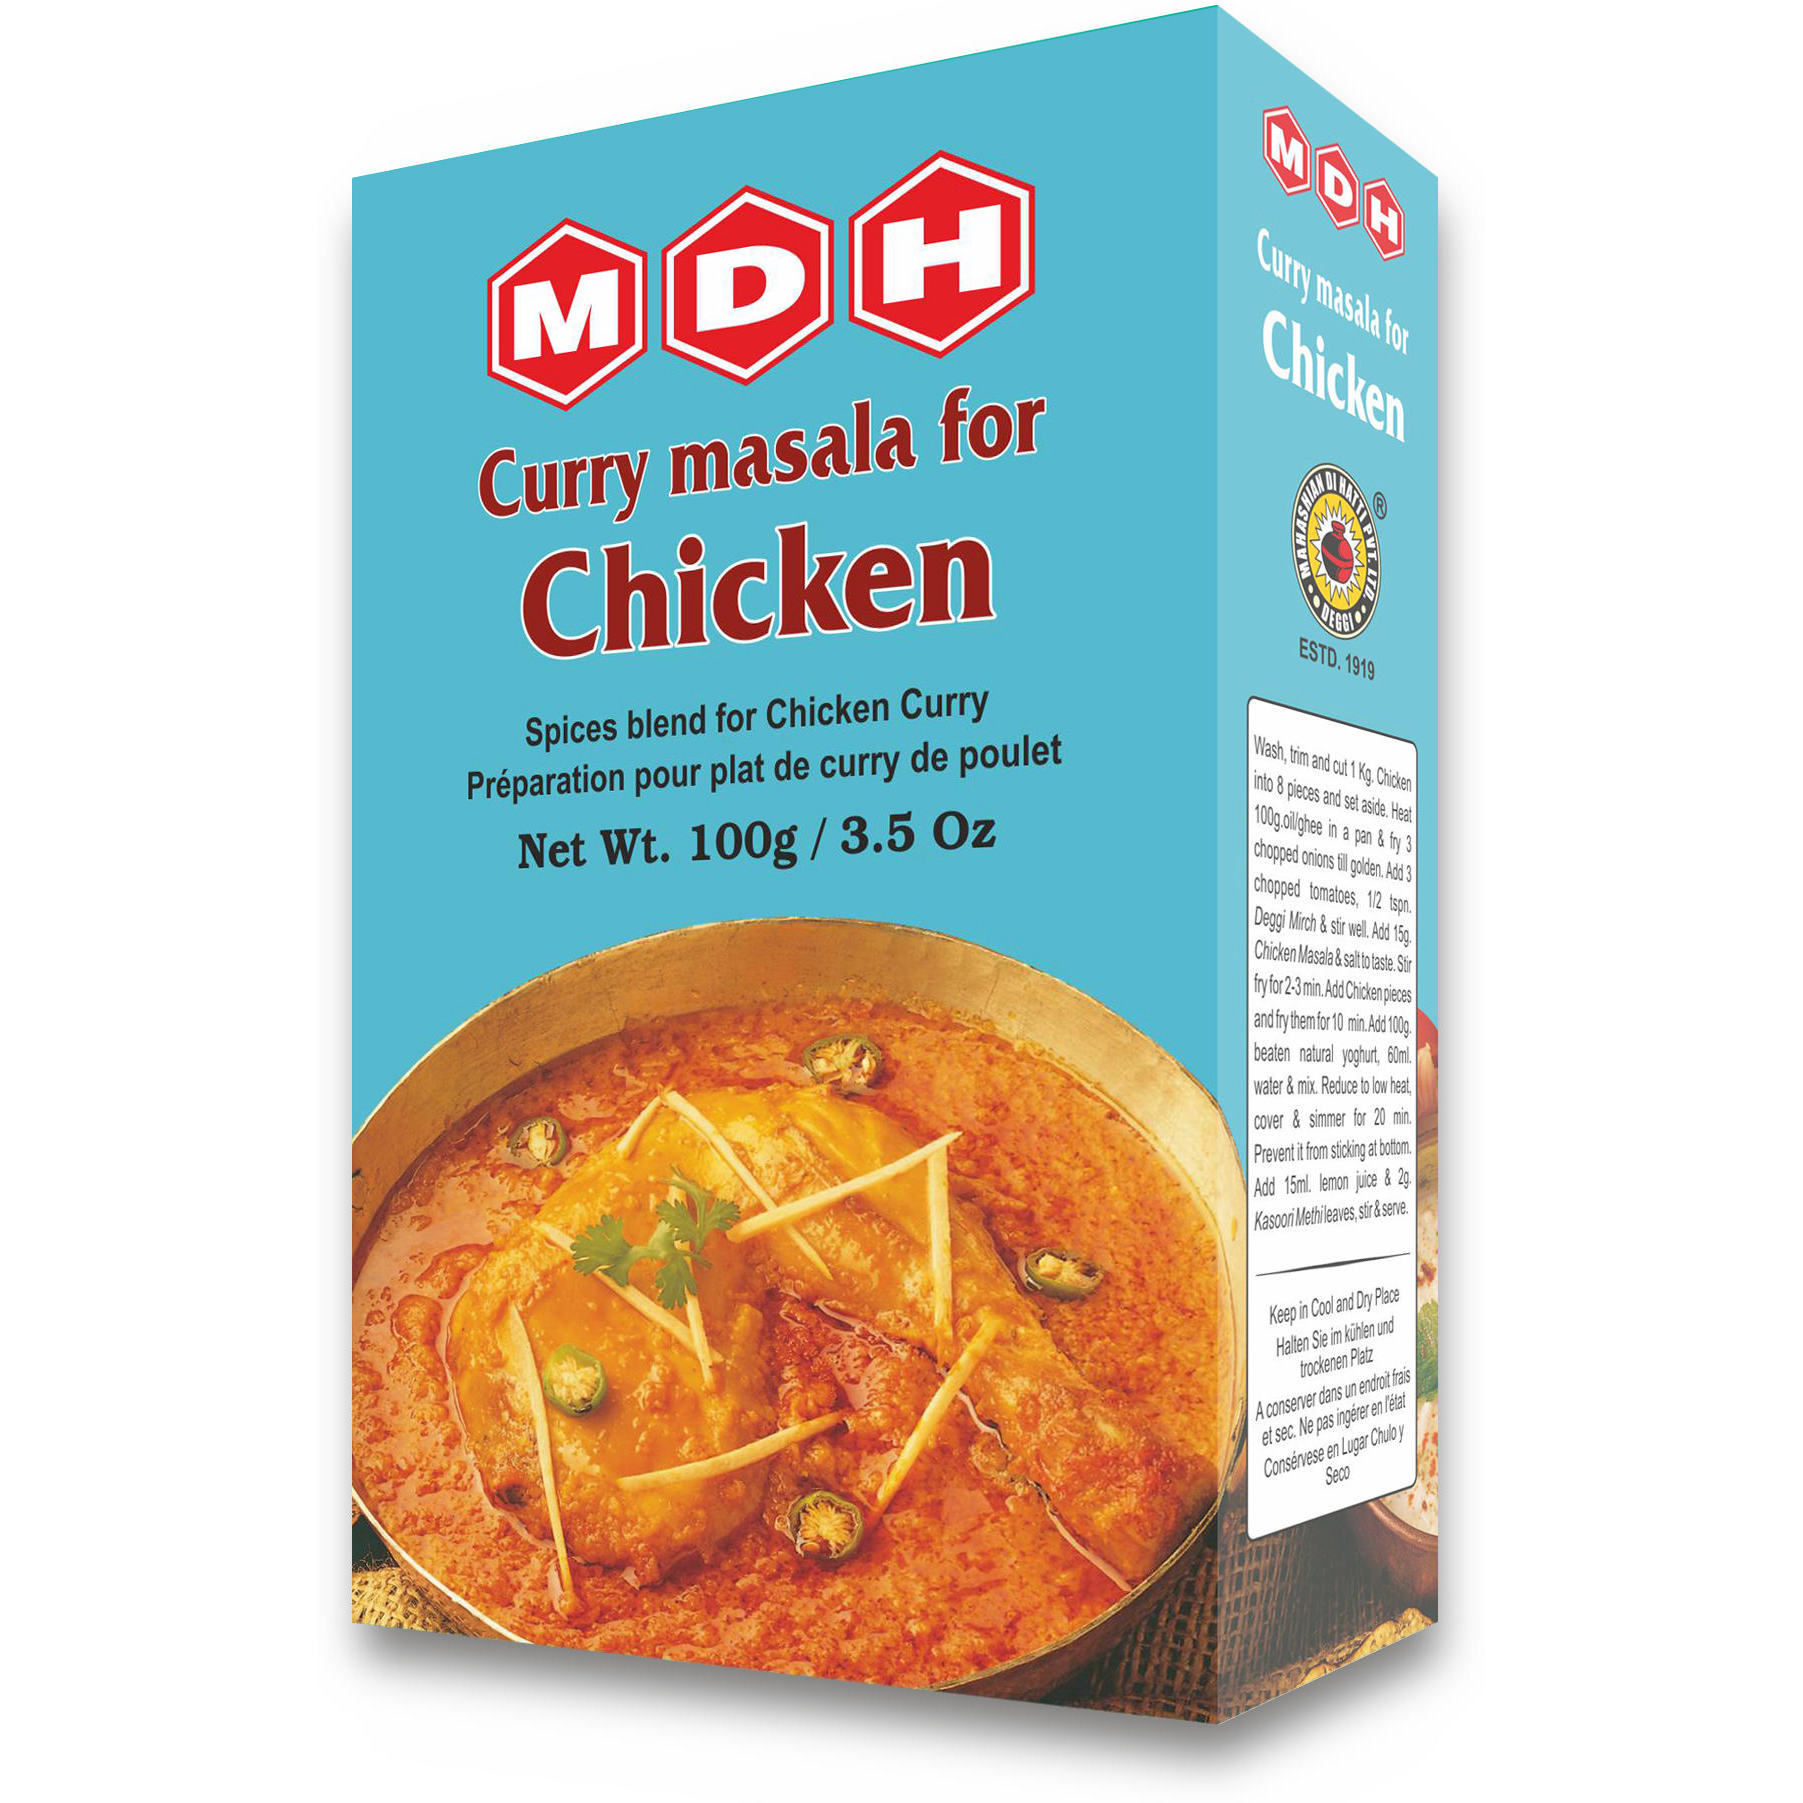 Case of 10 - Mdh Curry Masala For Chicken - 100 Gm (3.5 Oz)